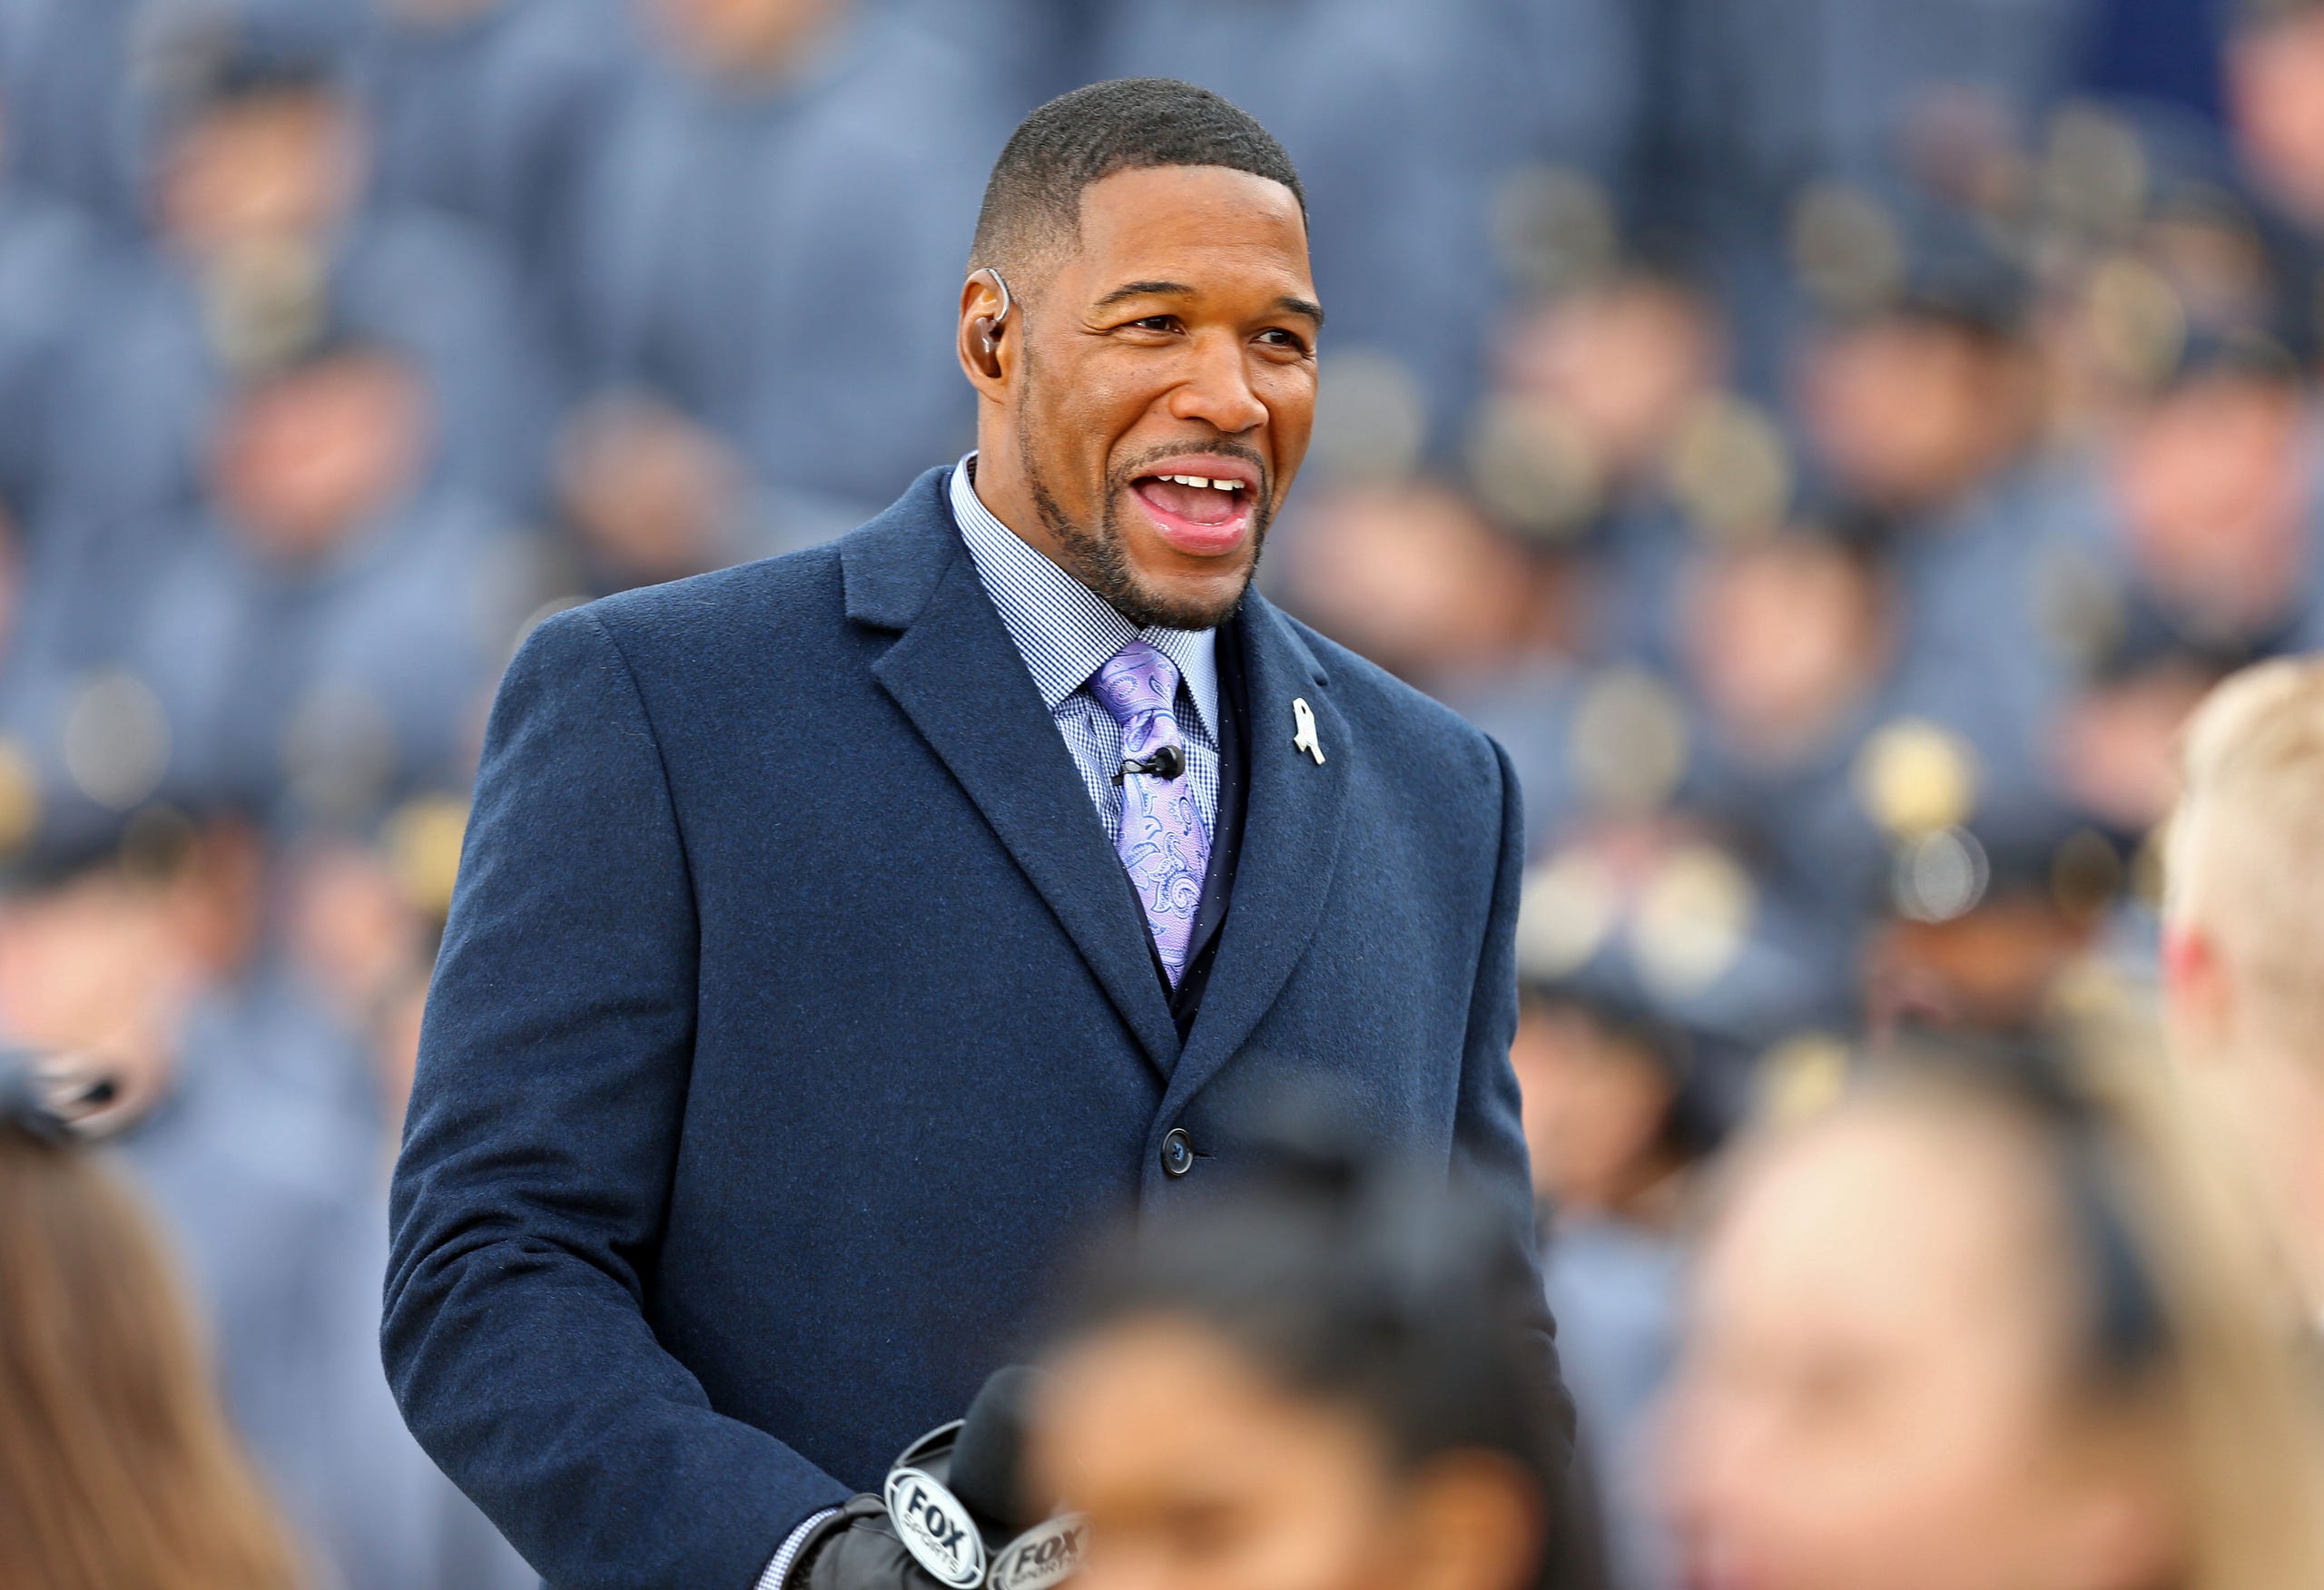 Fox NFL Sunday analyst Michael Strahan smiles during filming at the United States Military Academy.